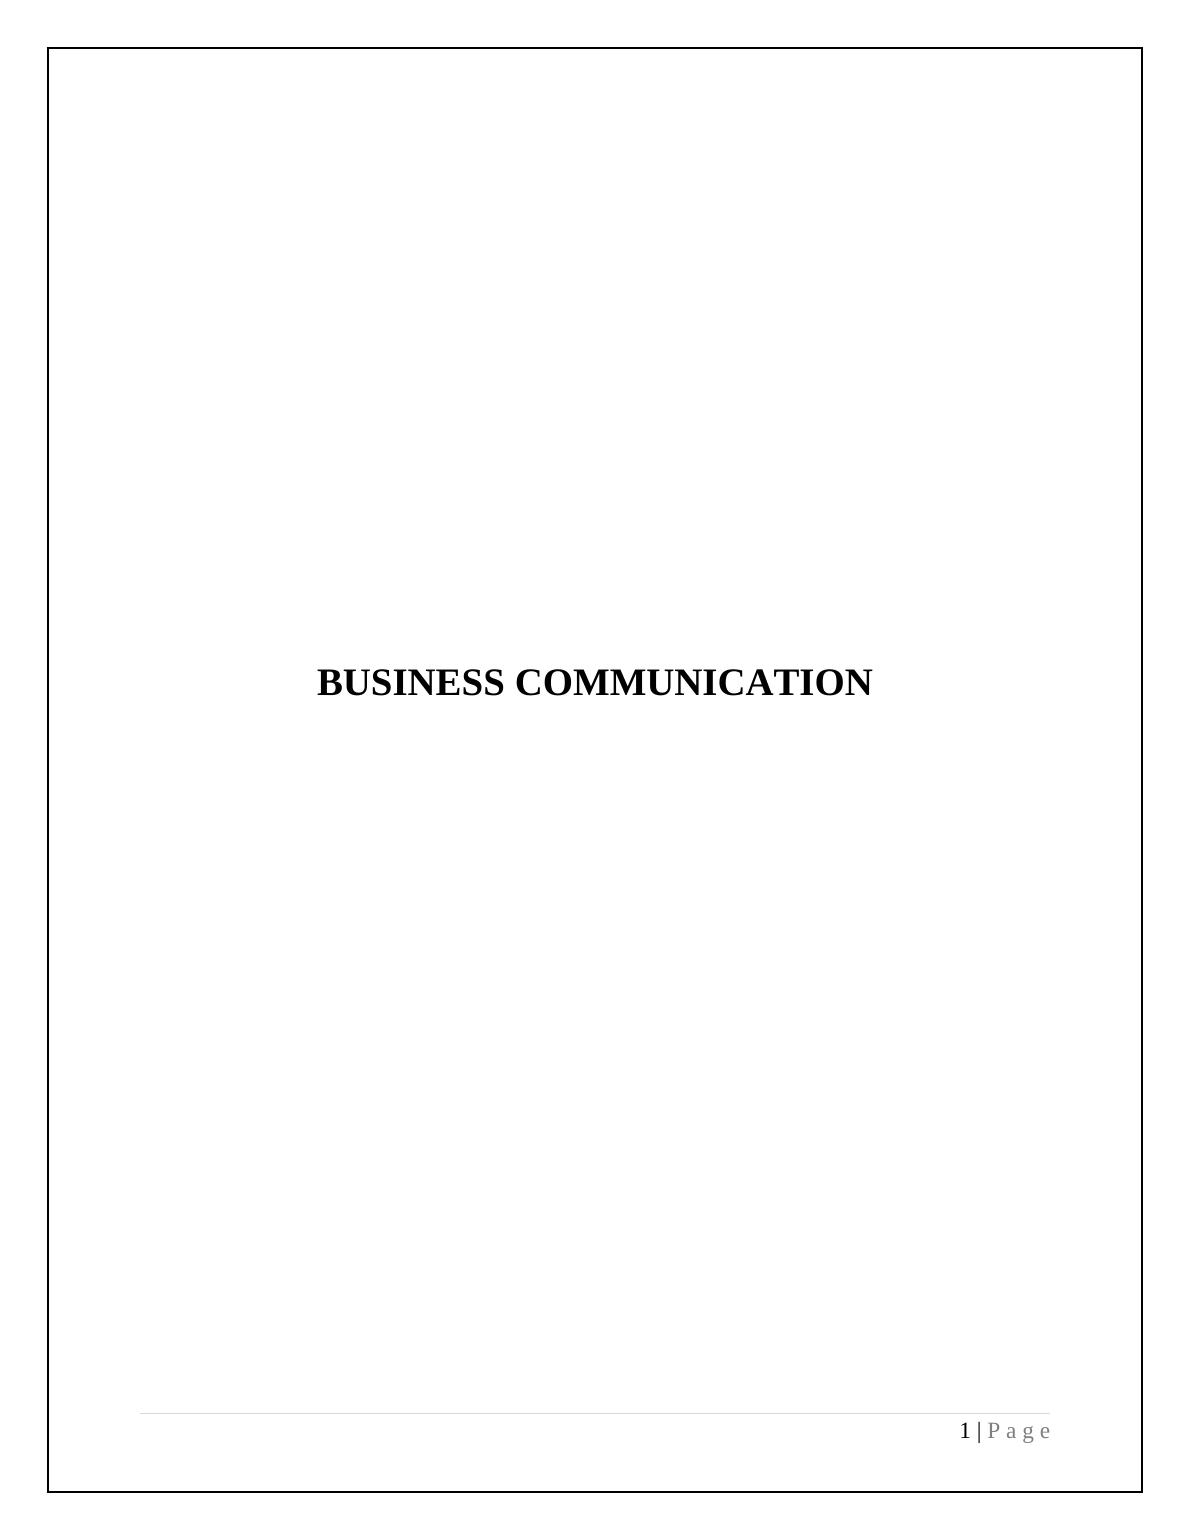 Importance of Workplace Environment in Business Communication_1